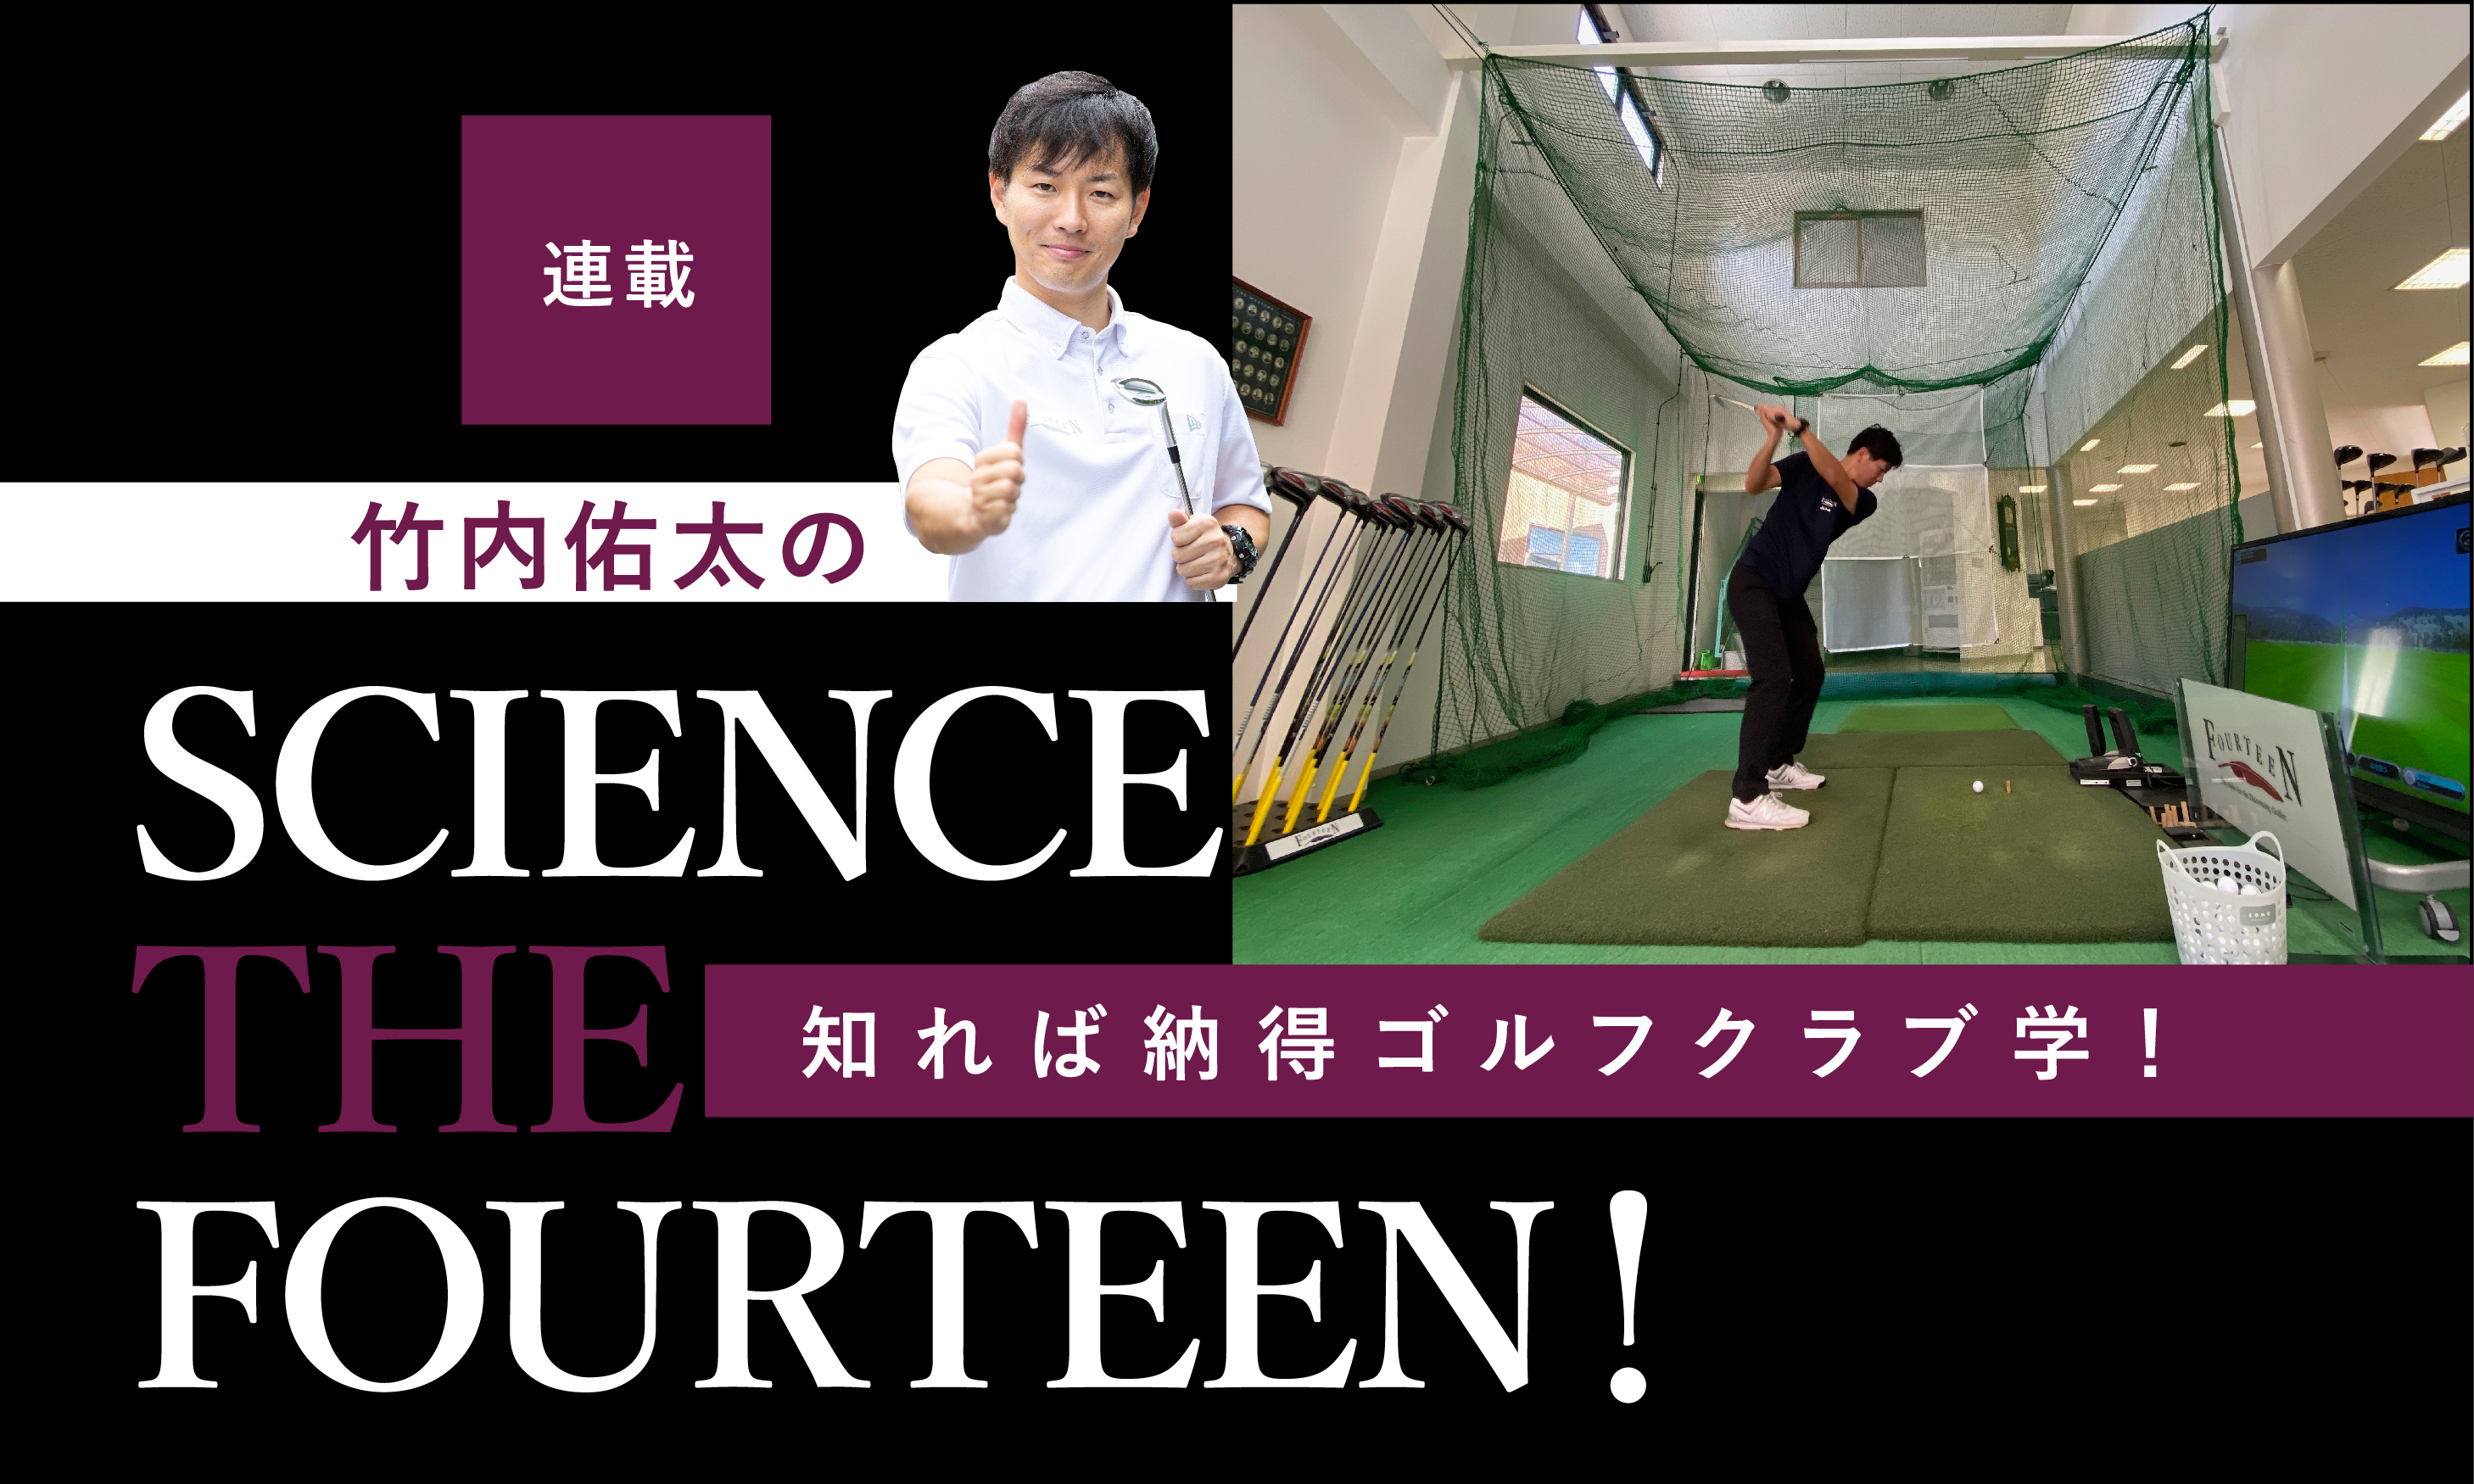 SCIENCE THE FOURTEEN！